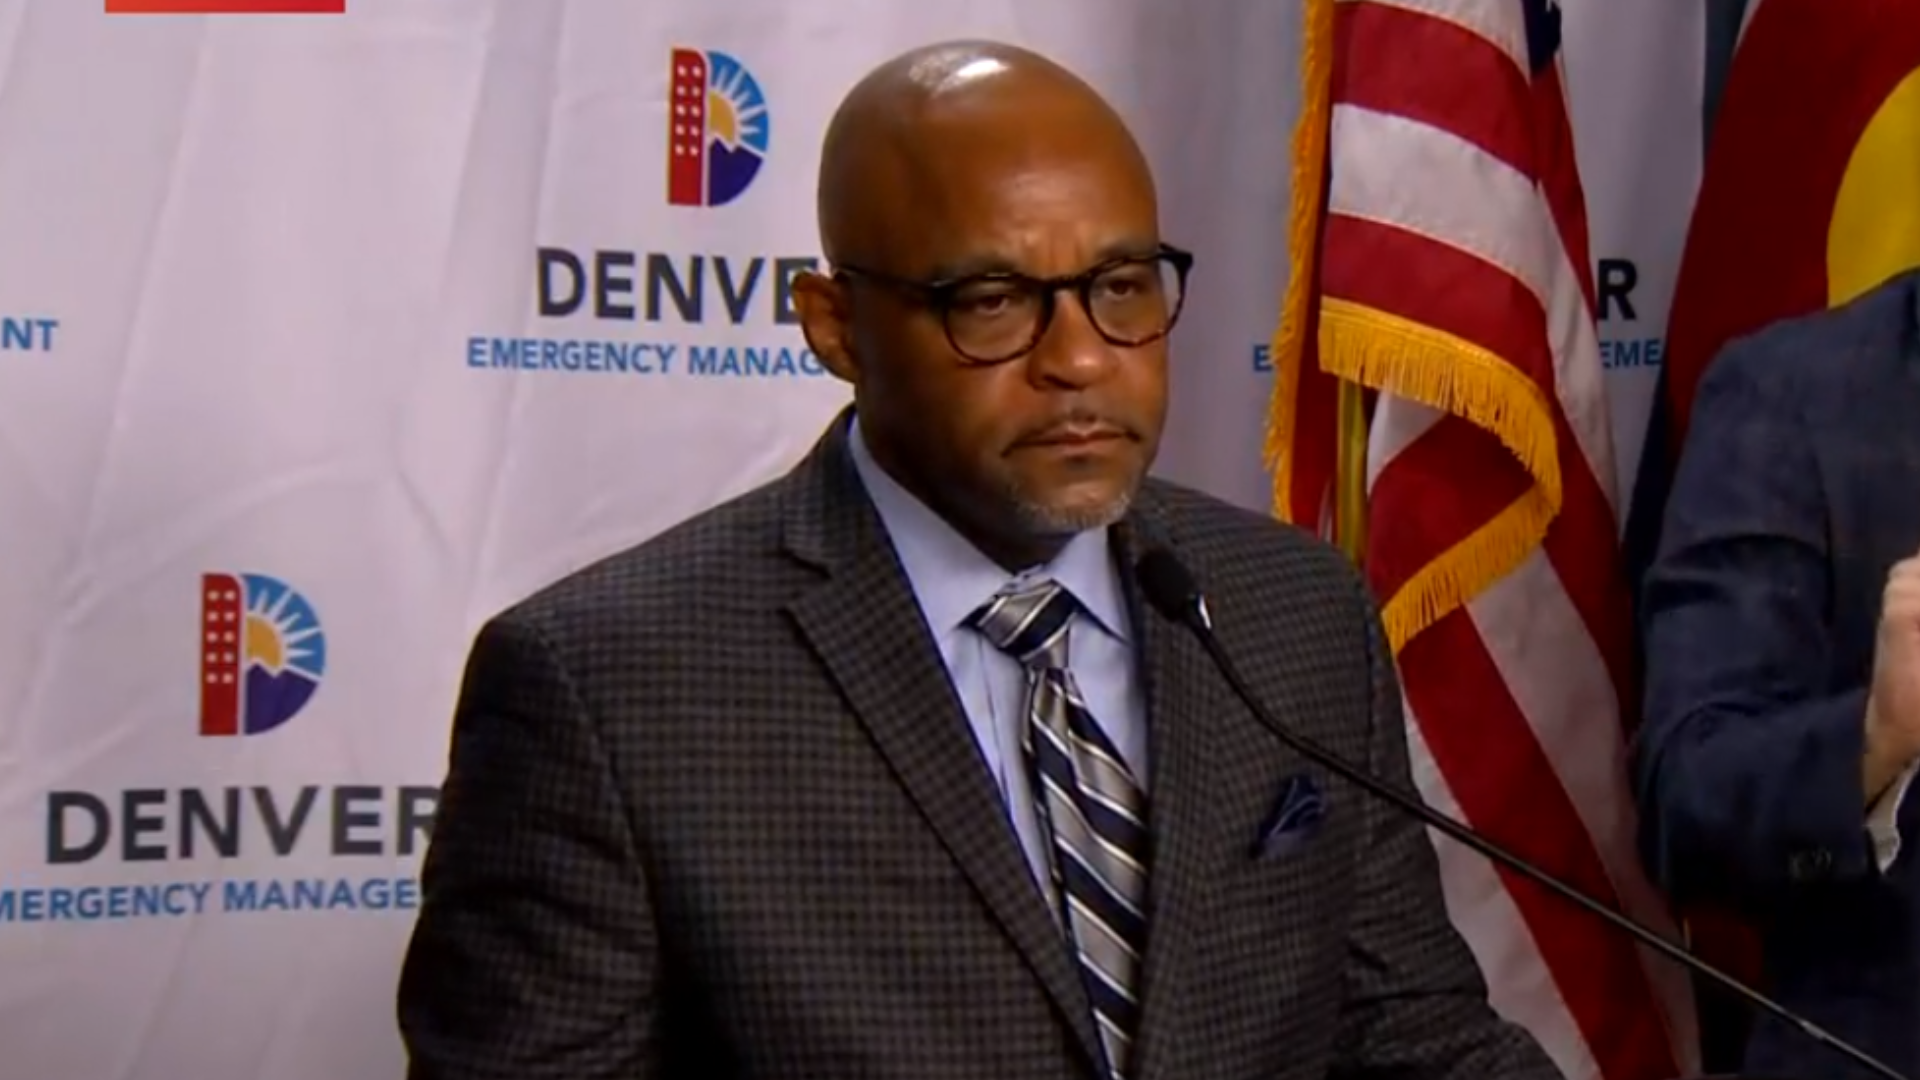 Denver Mayor Michael Hancock discusses COVID-19 response, recovery planning, business relief efforts and city-owned golf facilities on Monday, April 20, 2020.